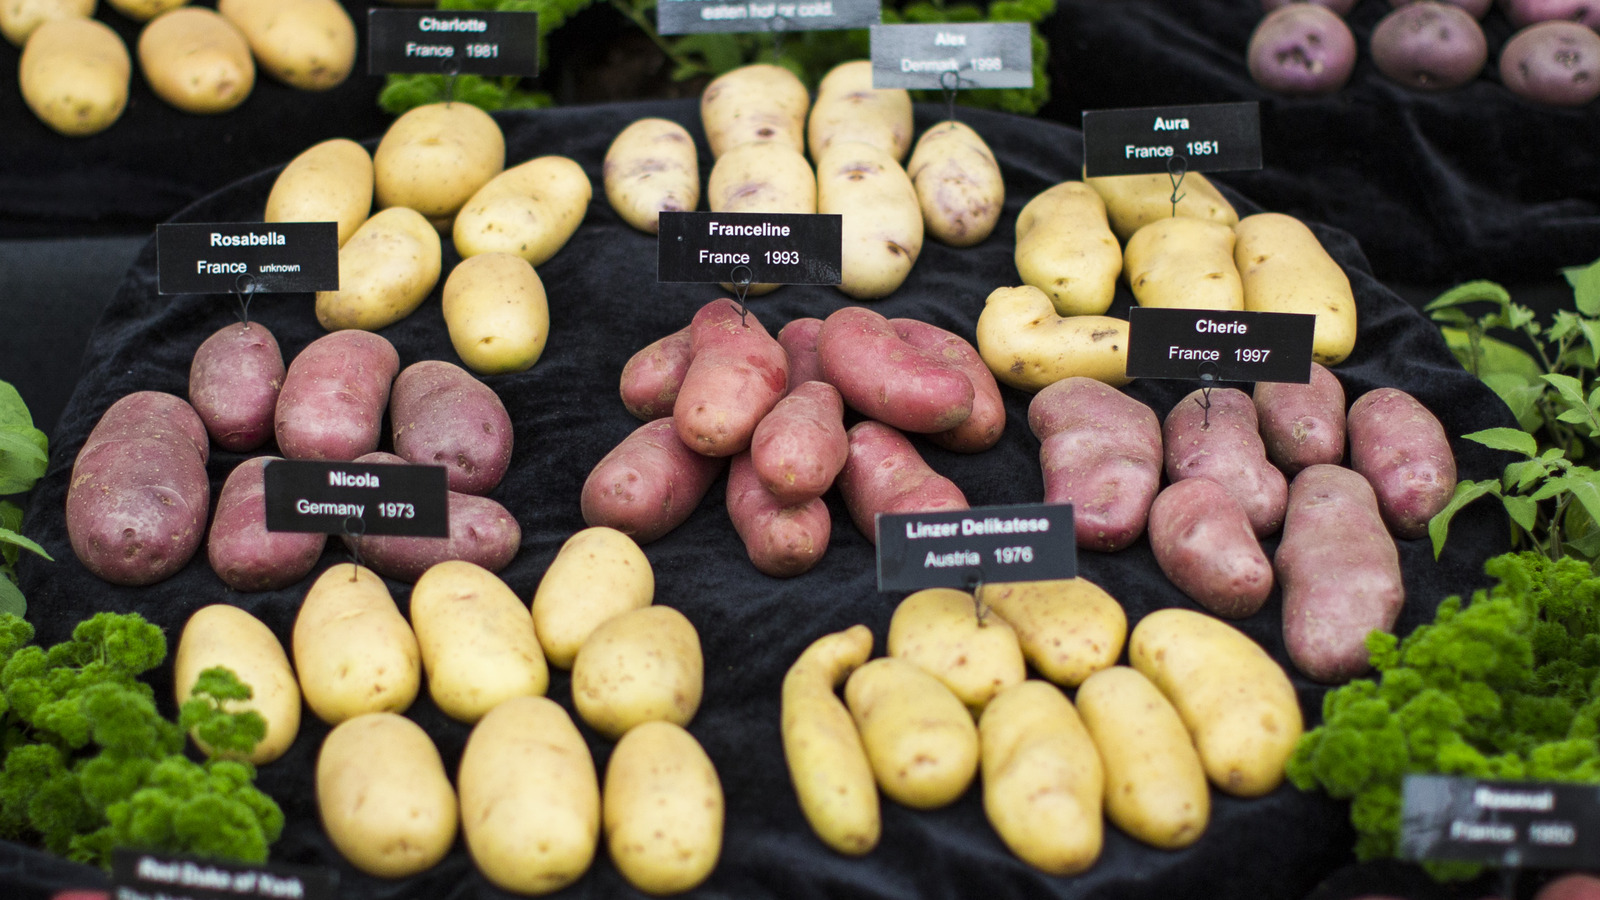 There's a New Type of Potato in Stores That's So Creamy You Don't